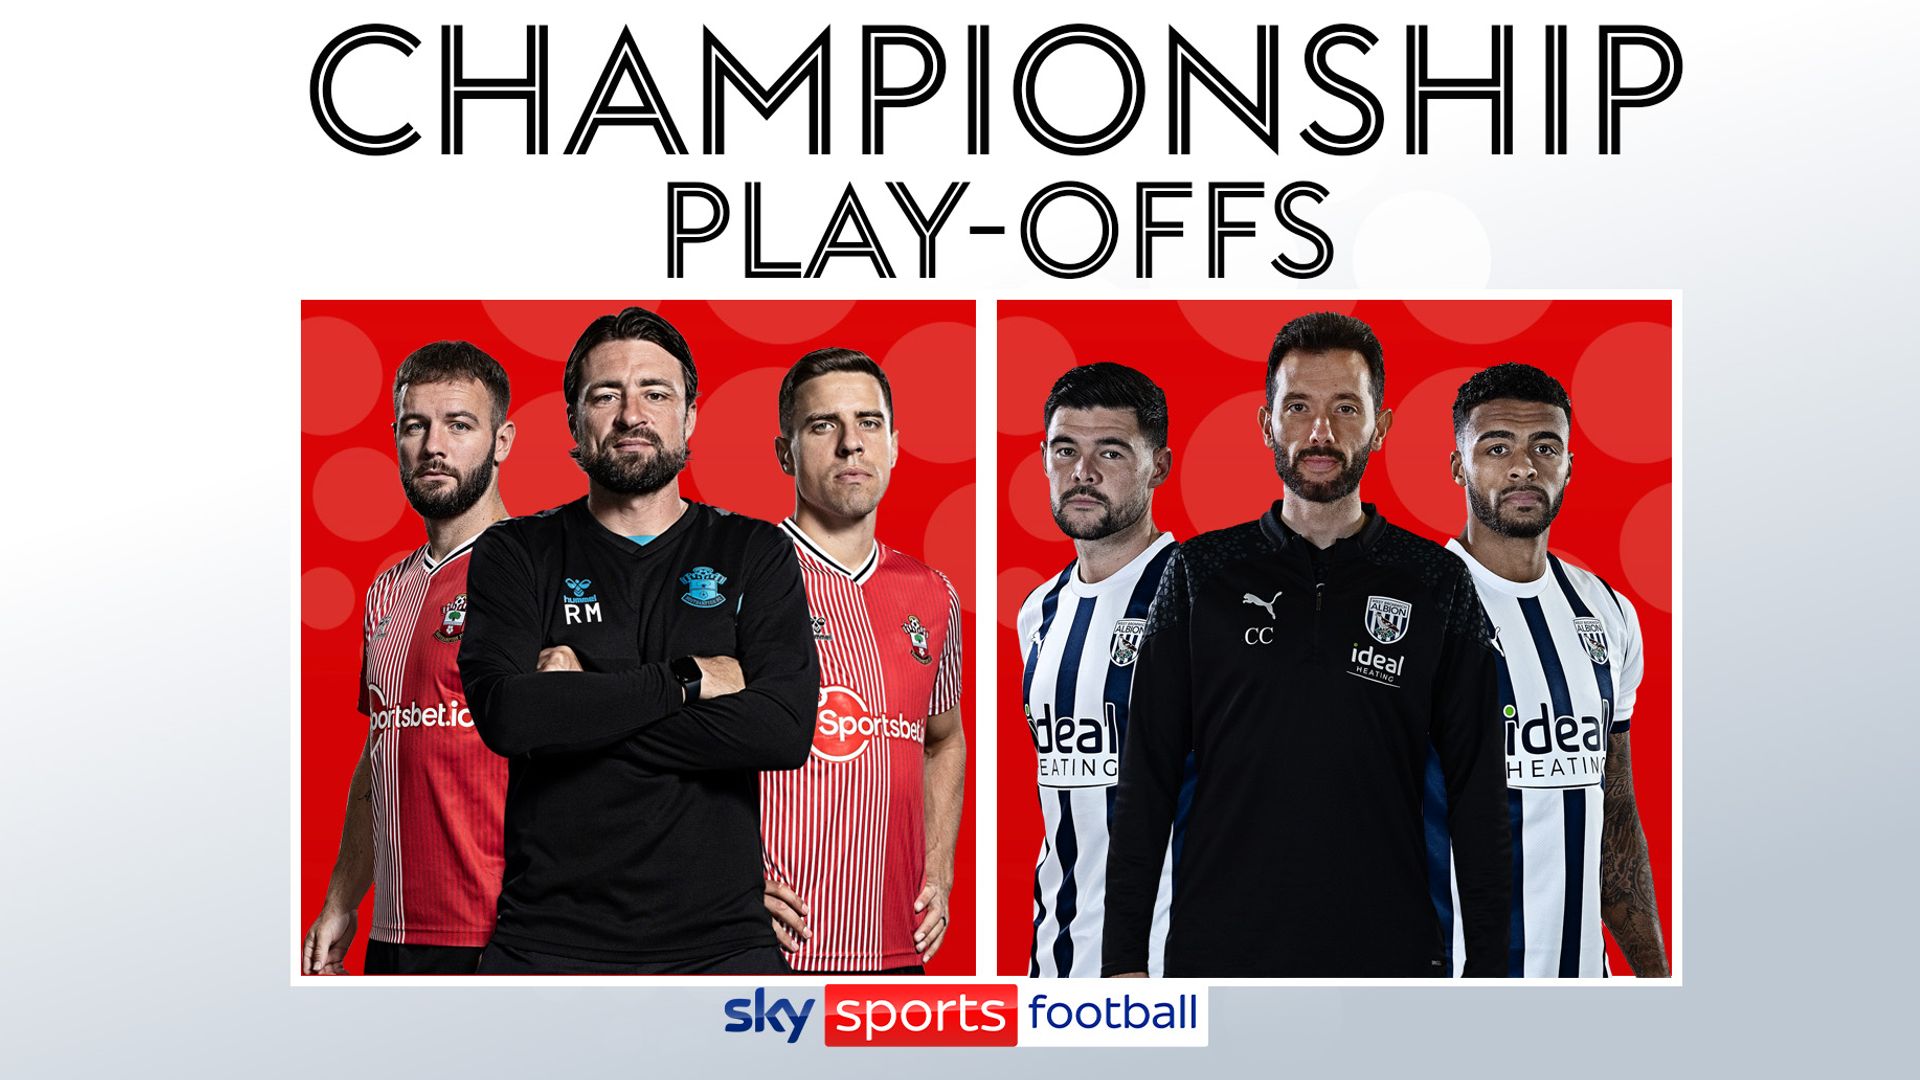 Southampton vs West Brom: Who will prevail in Championship play-off showdown?